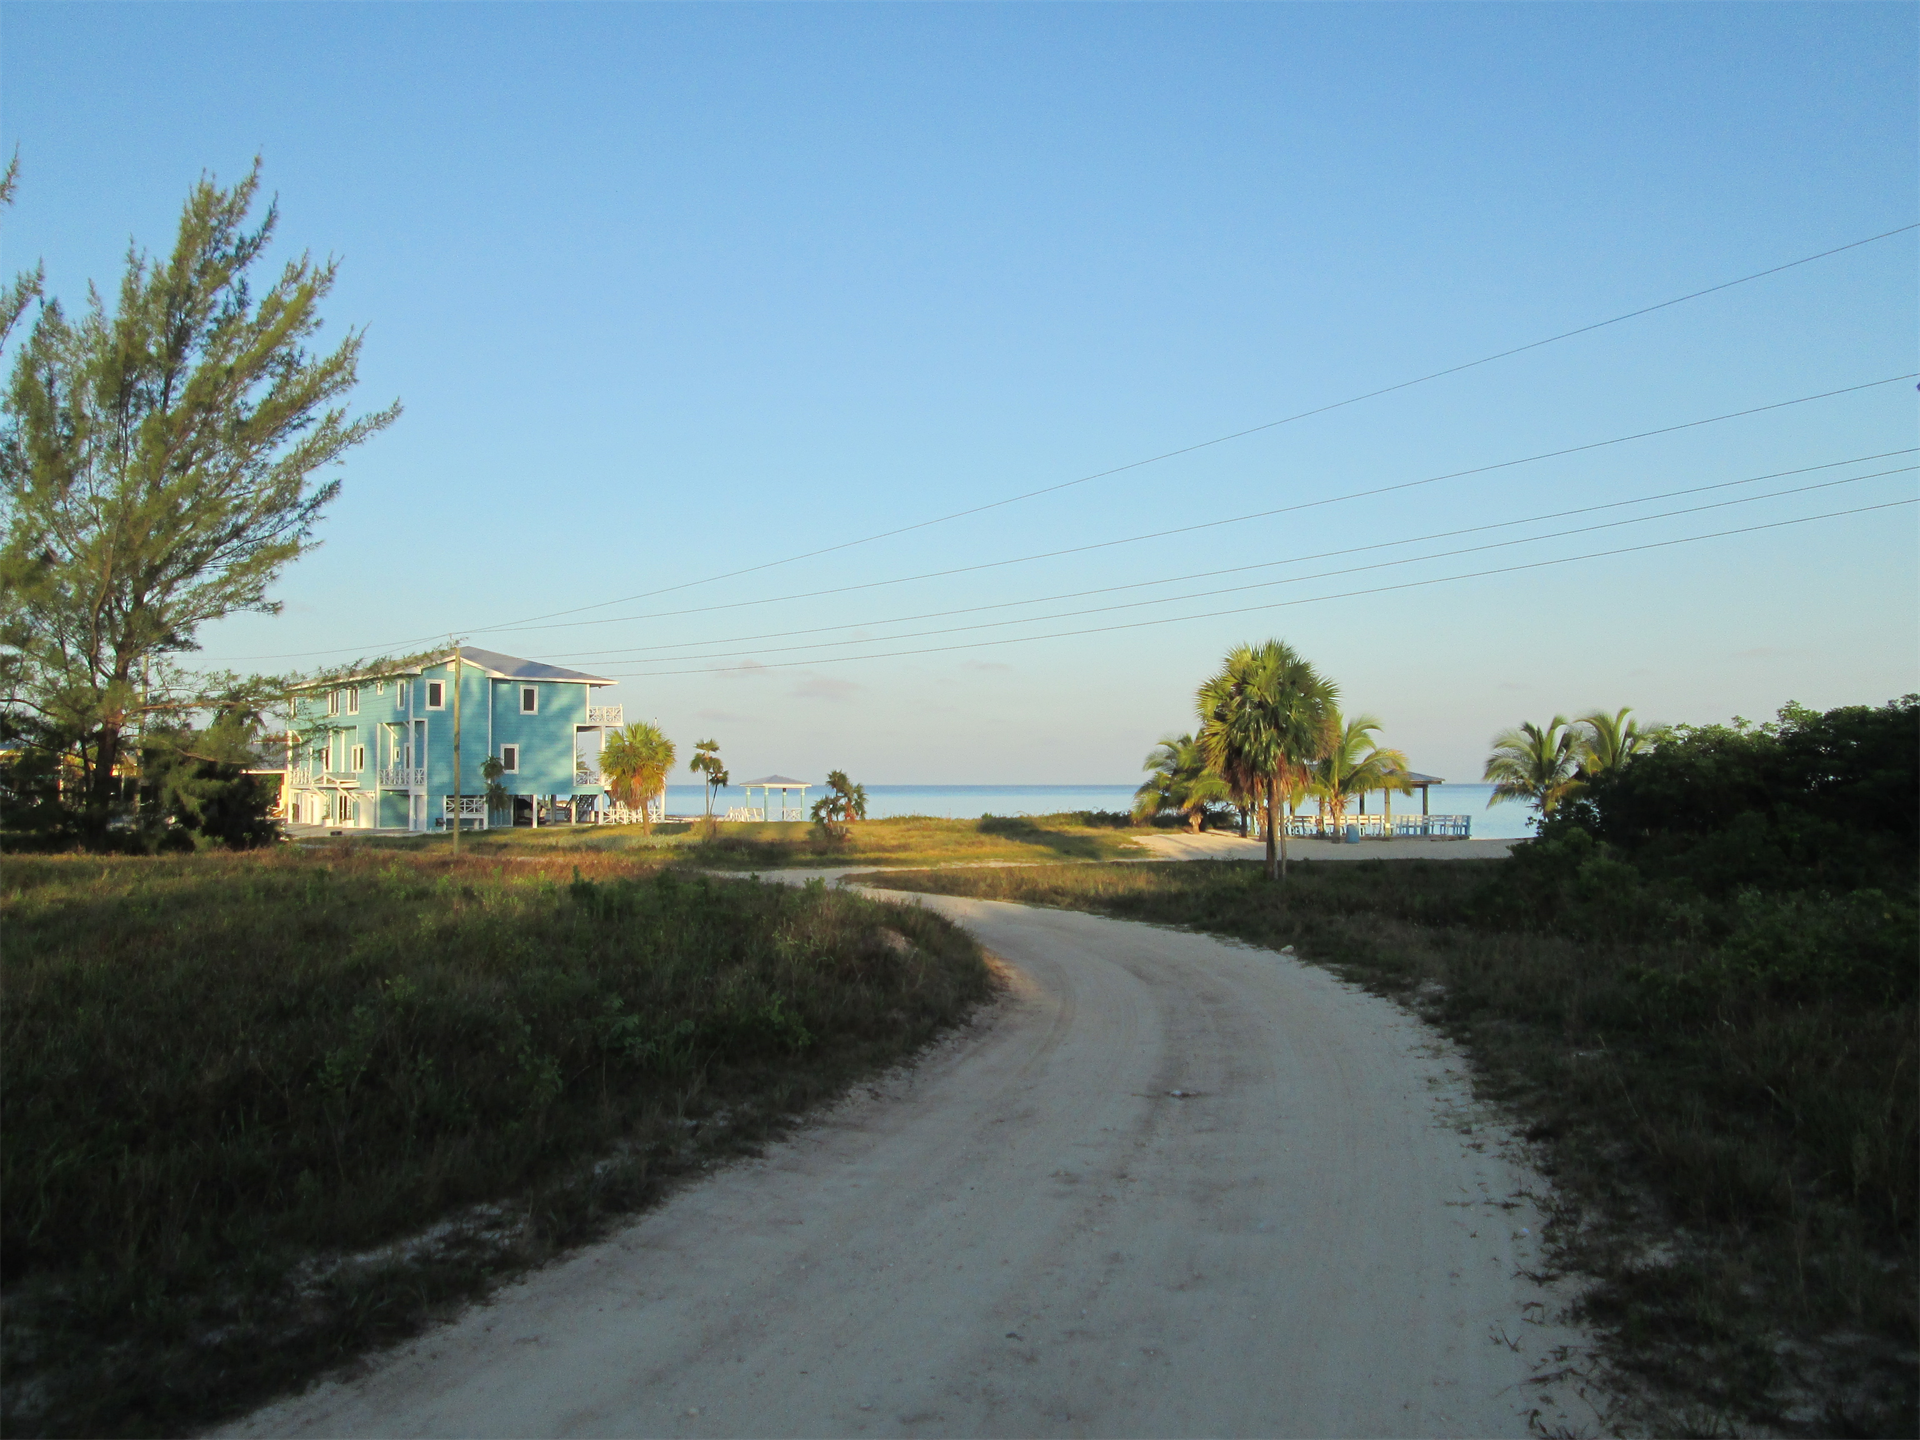 6. Land / Vacant Lot for Sale at #44 Block #1 Port Royale South Bimini South Bimini, Bimini #44 BLOCK #1 Bahamas